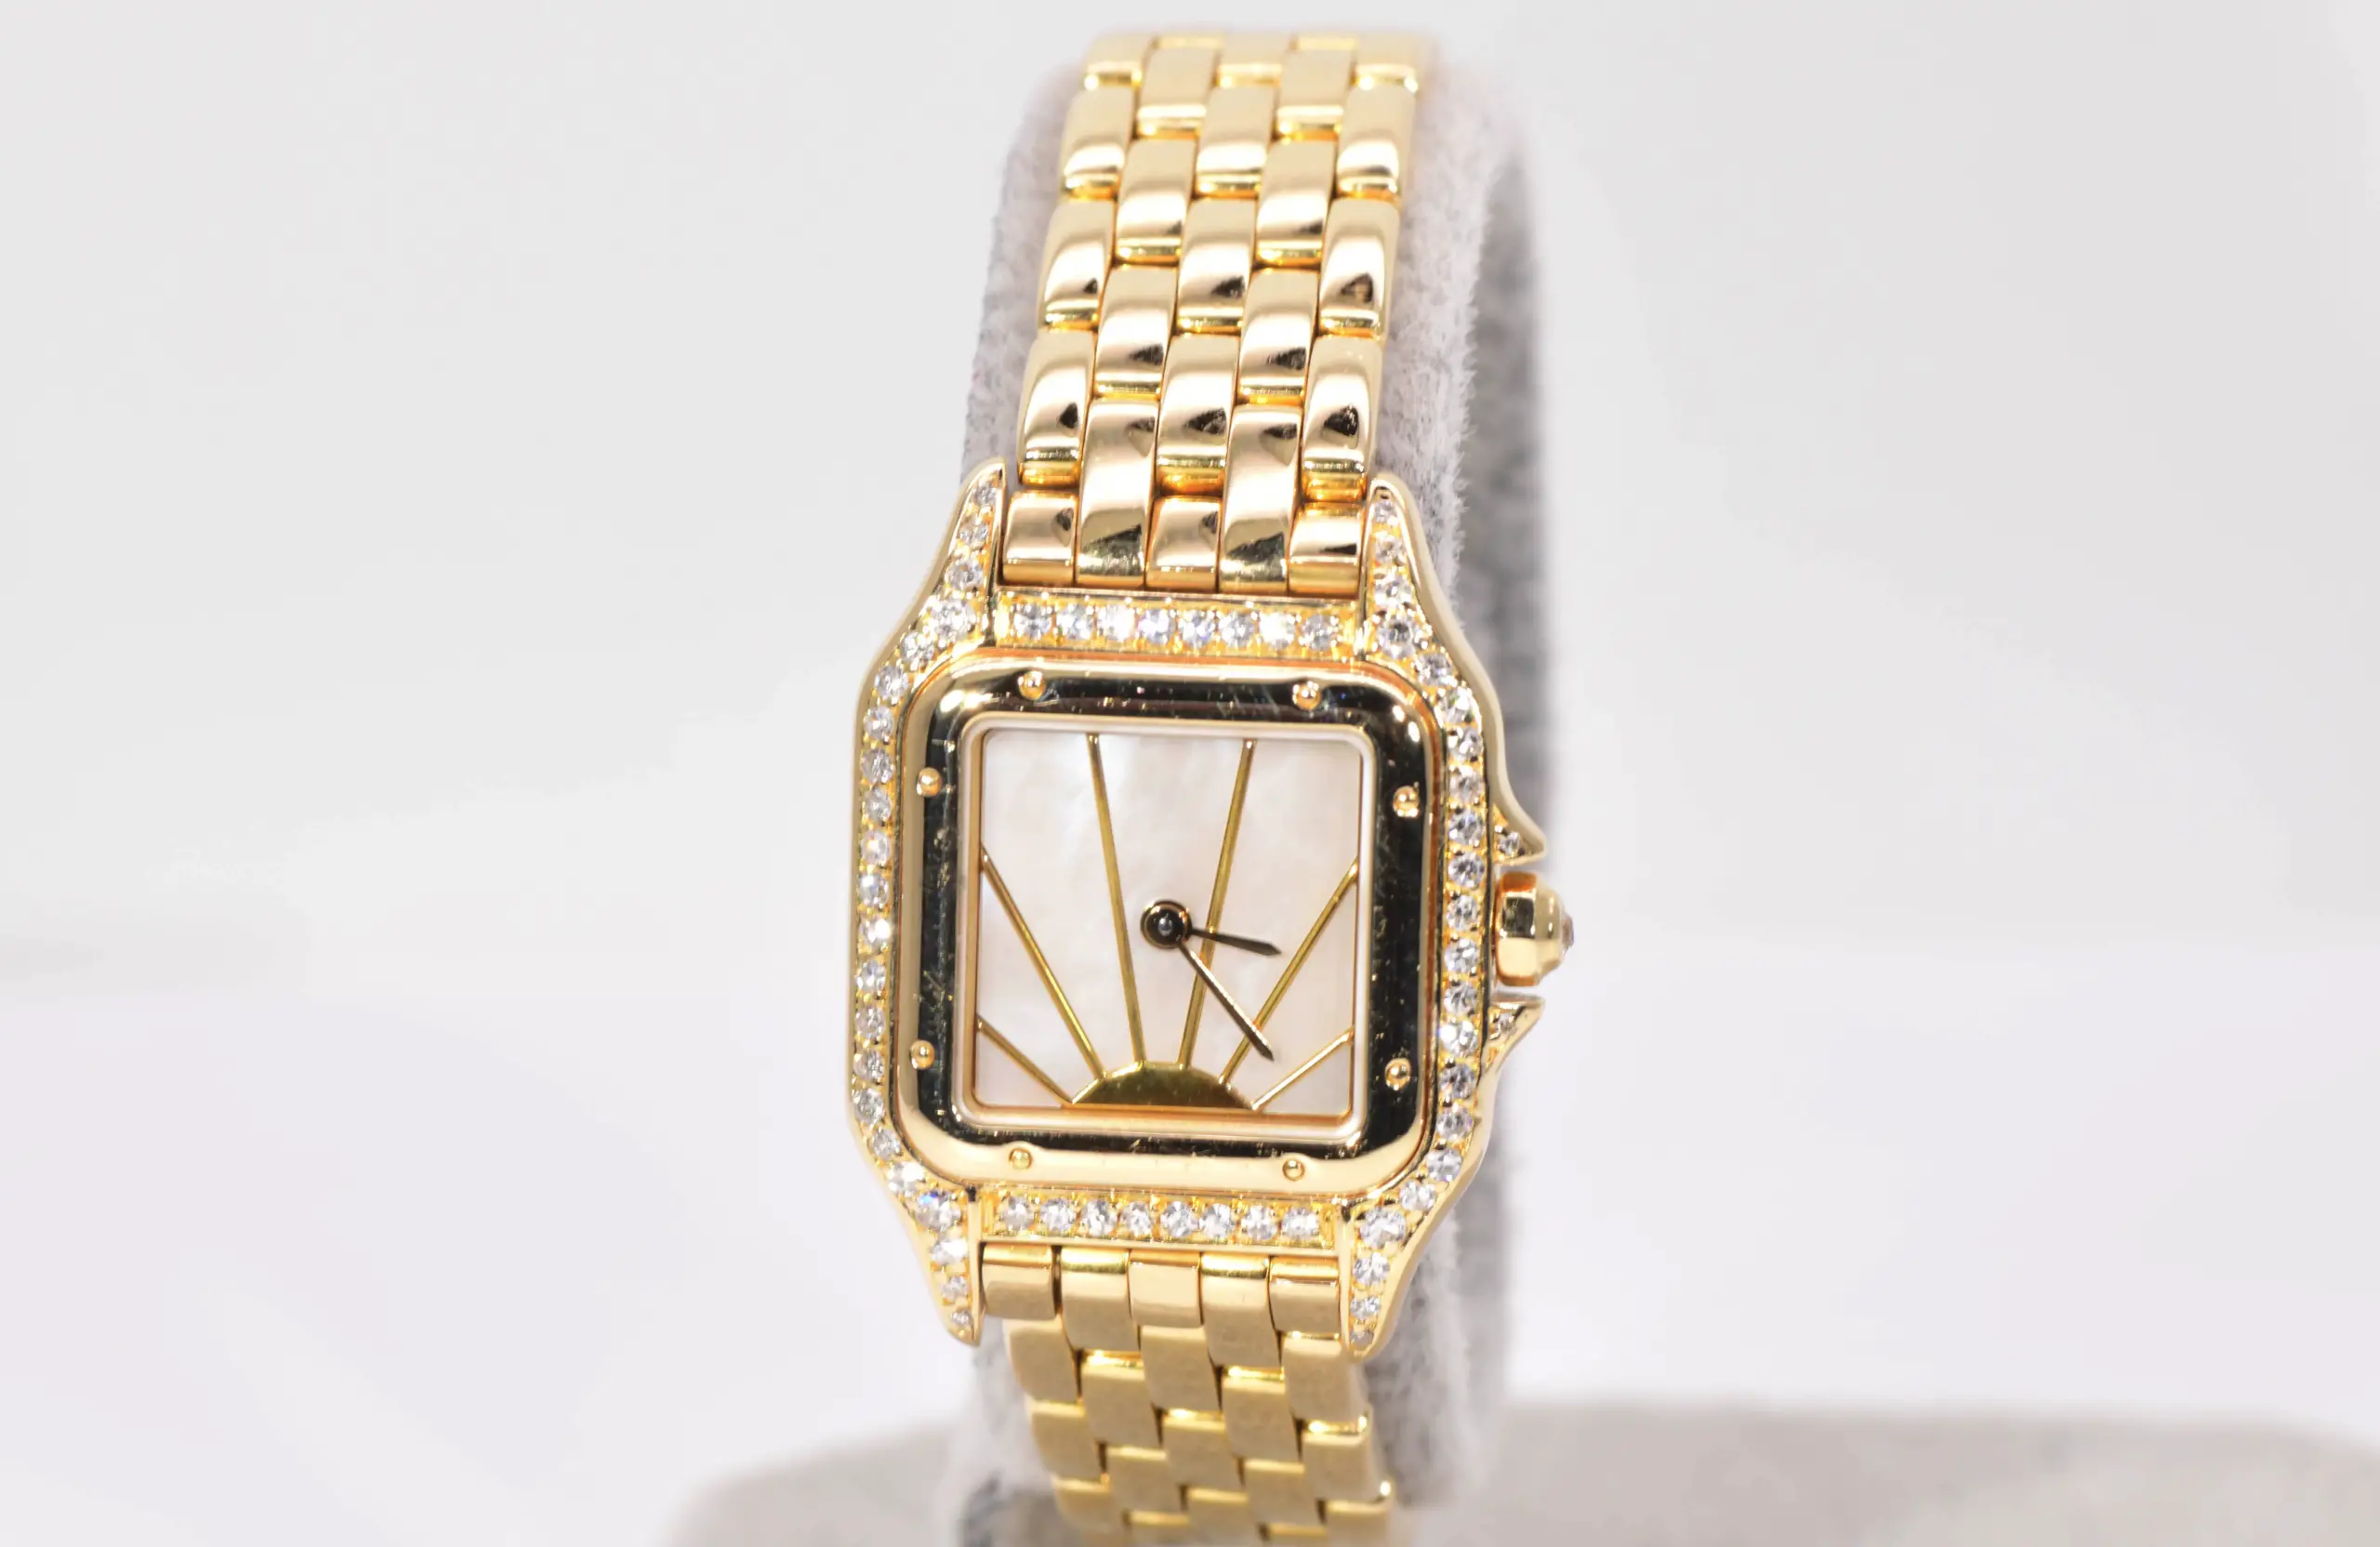 Cartier Panthere Watch 22mm Limited Edition Sundial Diamond 18k Gold